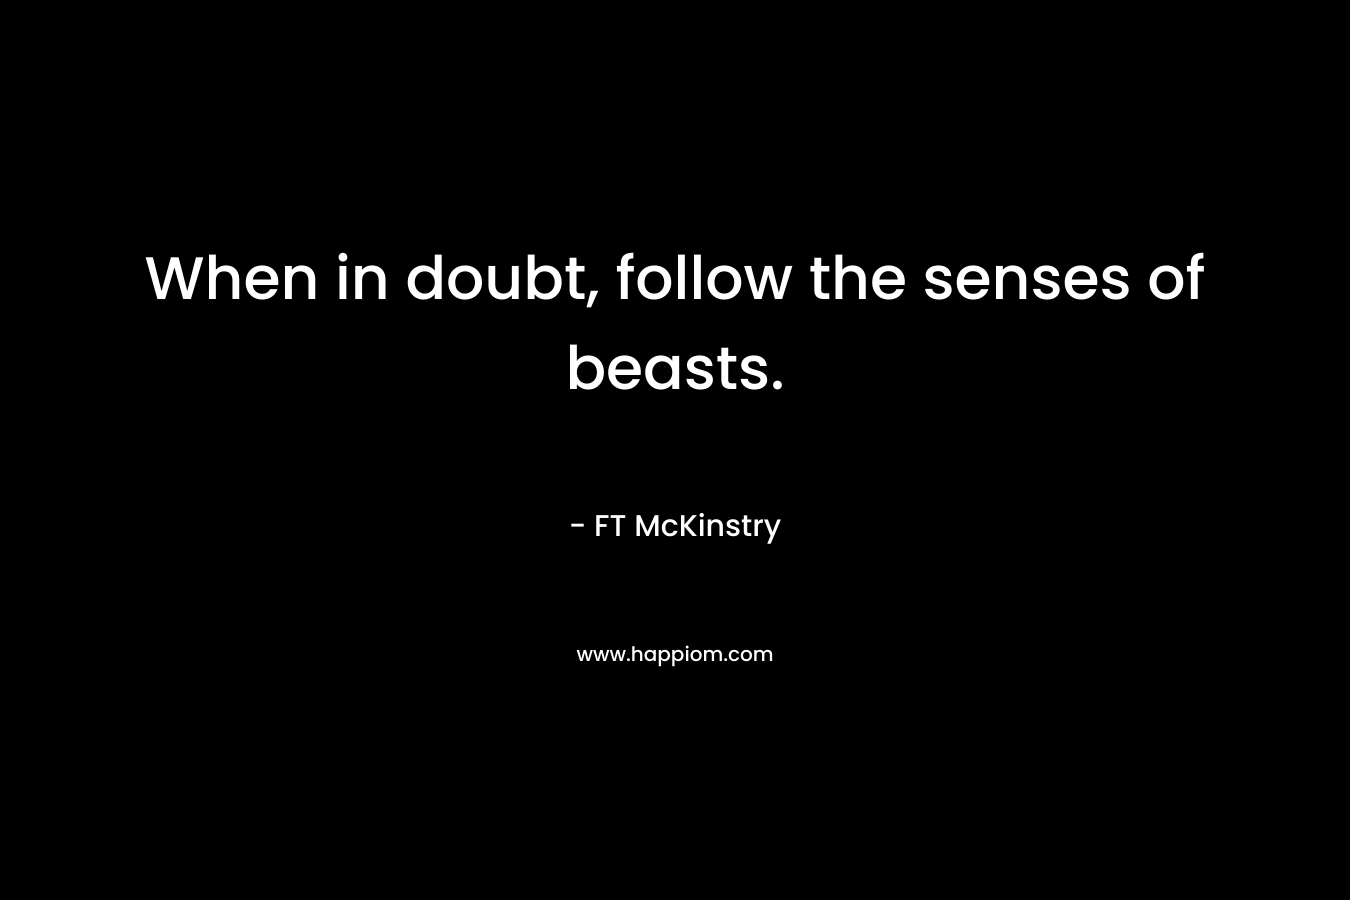 When in doubt, follow the senses of beasts. – FT McKinstry